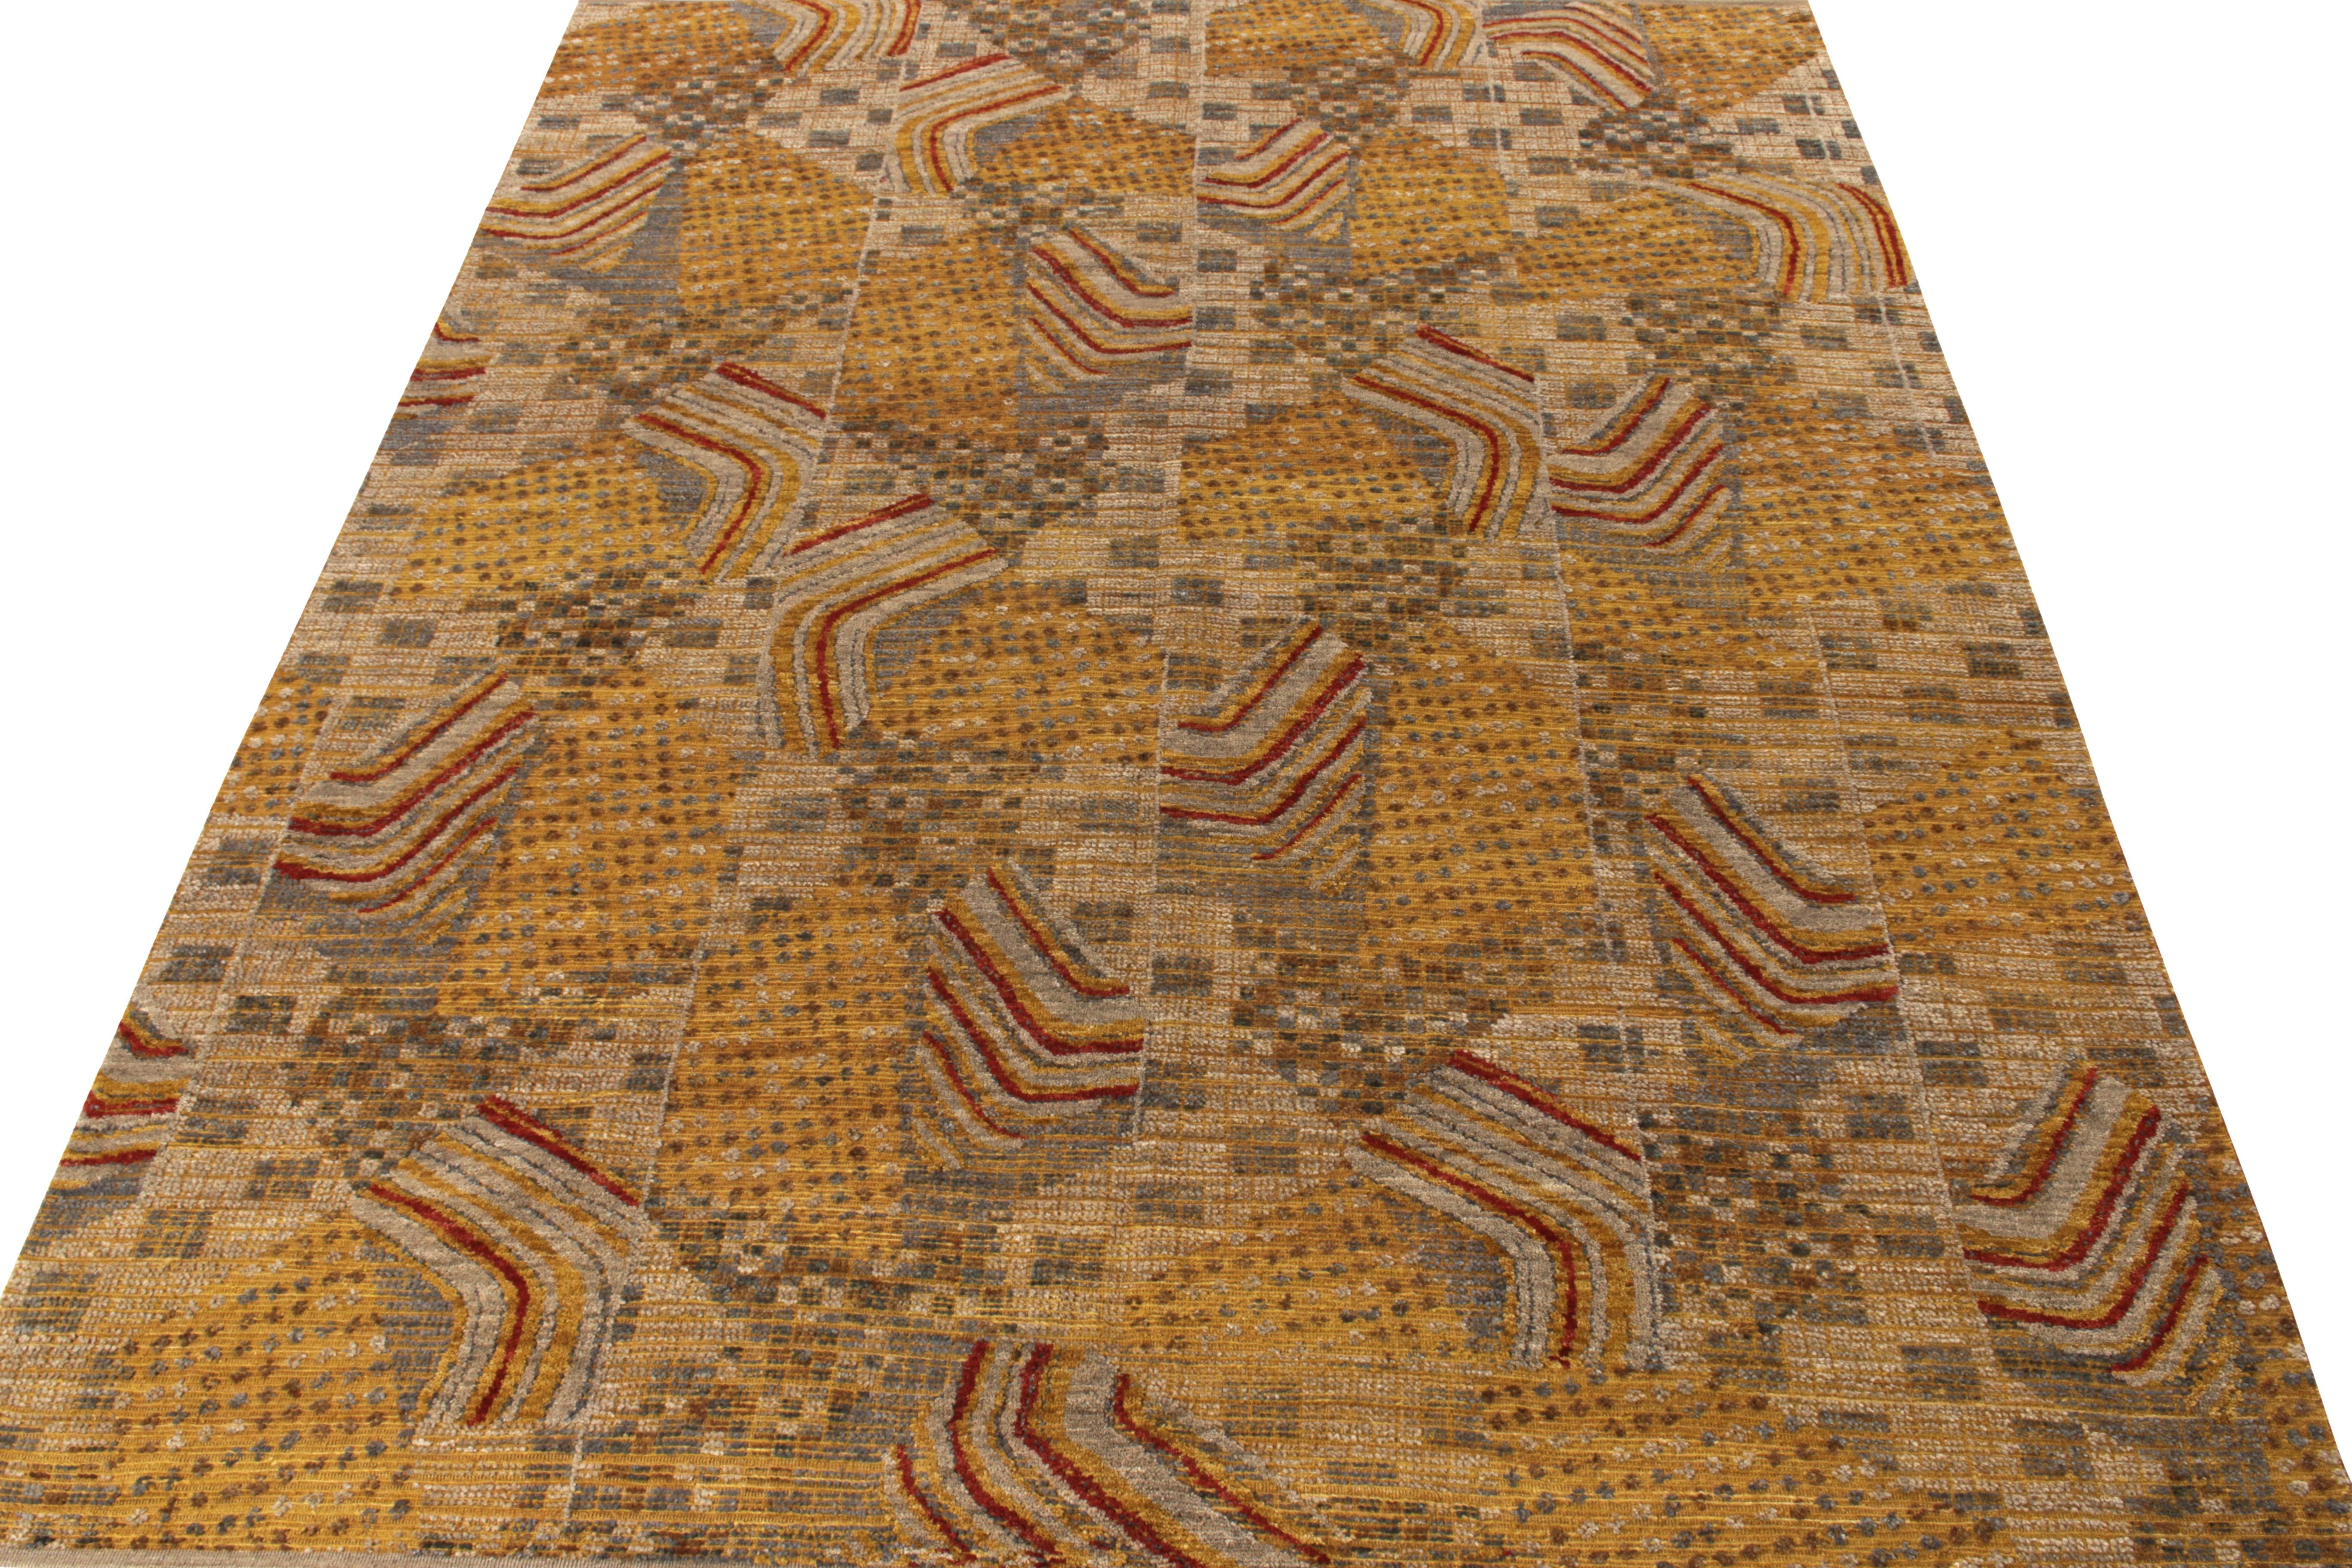 An 8x10 modern rug by Rug & Kilim, boldly reimaging a variety of influences from mid-century modern rug styles to abstract art sensibilities. Hand-knotted in wool with a high-low texture, complementing the 1950s geometry with movement and